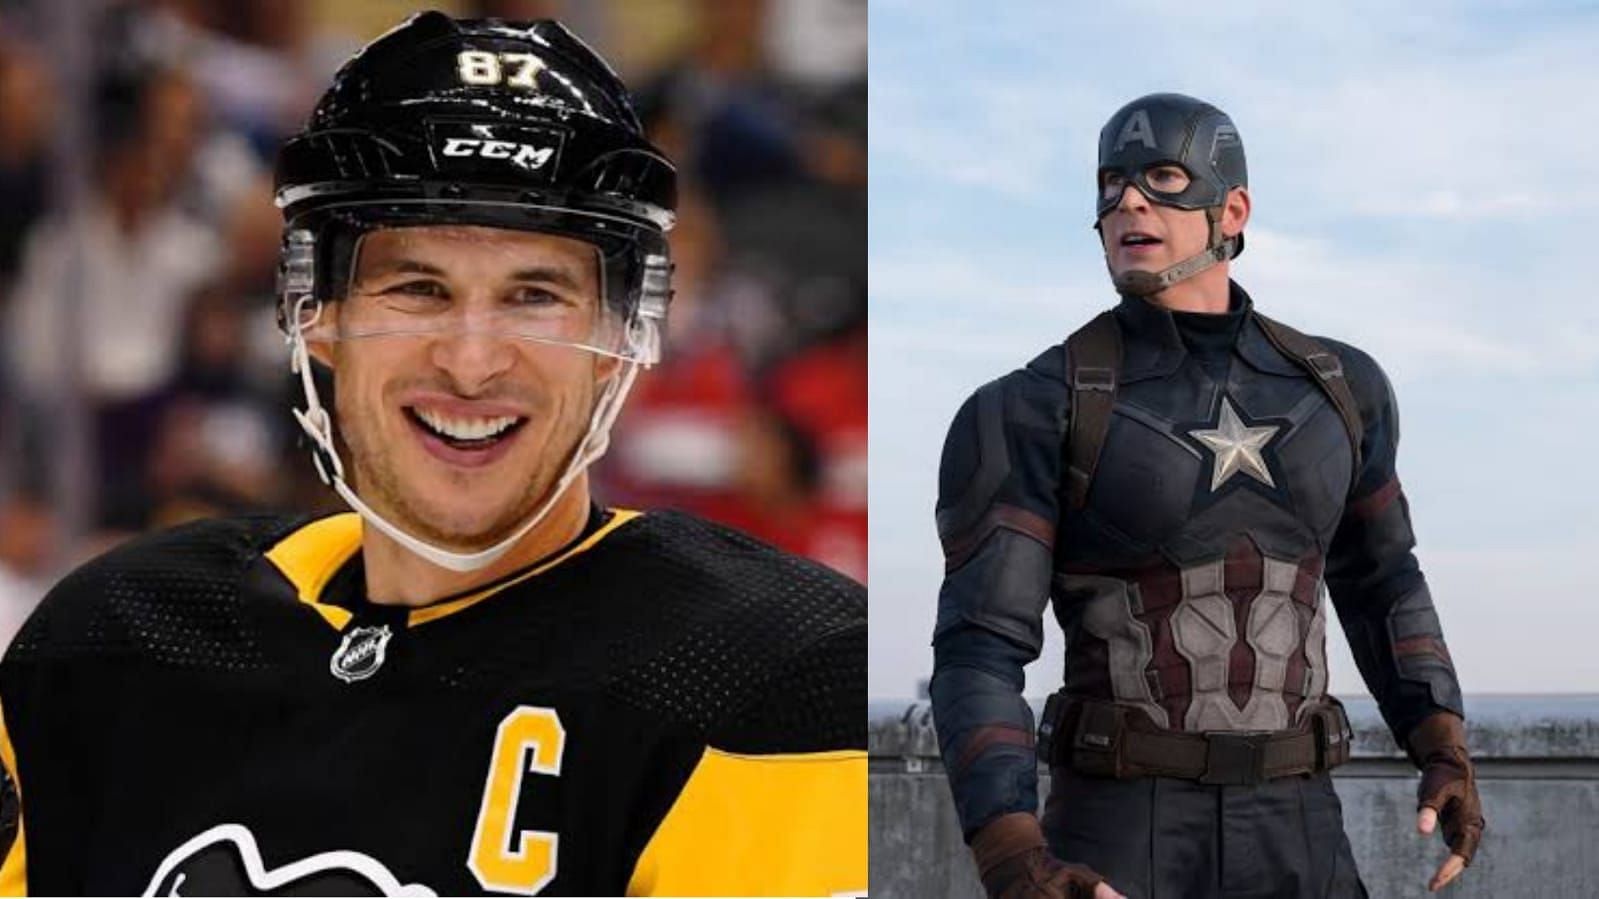 We asked AI to compare active NHL players to Marvel superheroes and got a fascinating answer